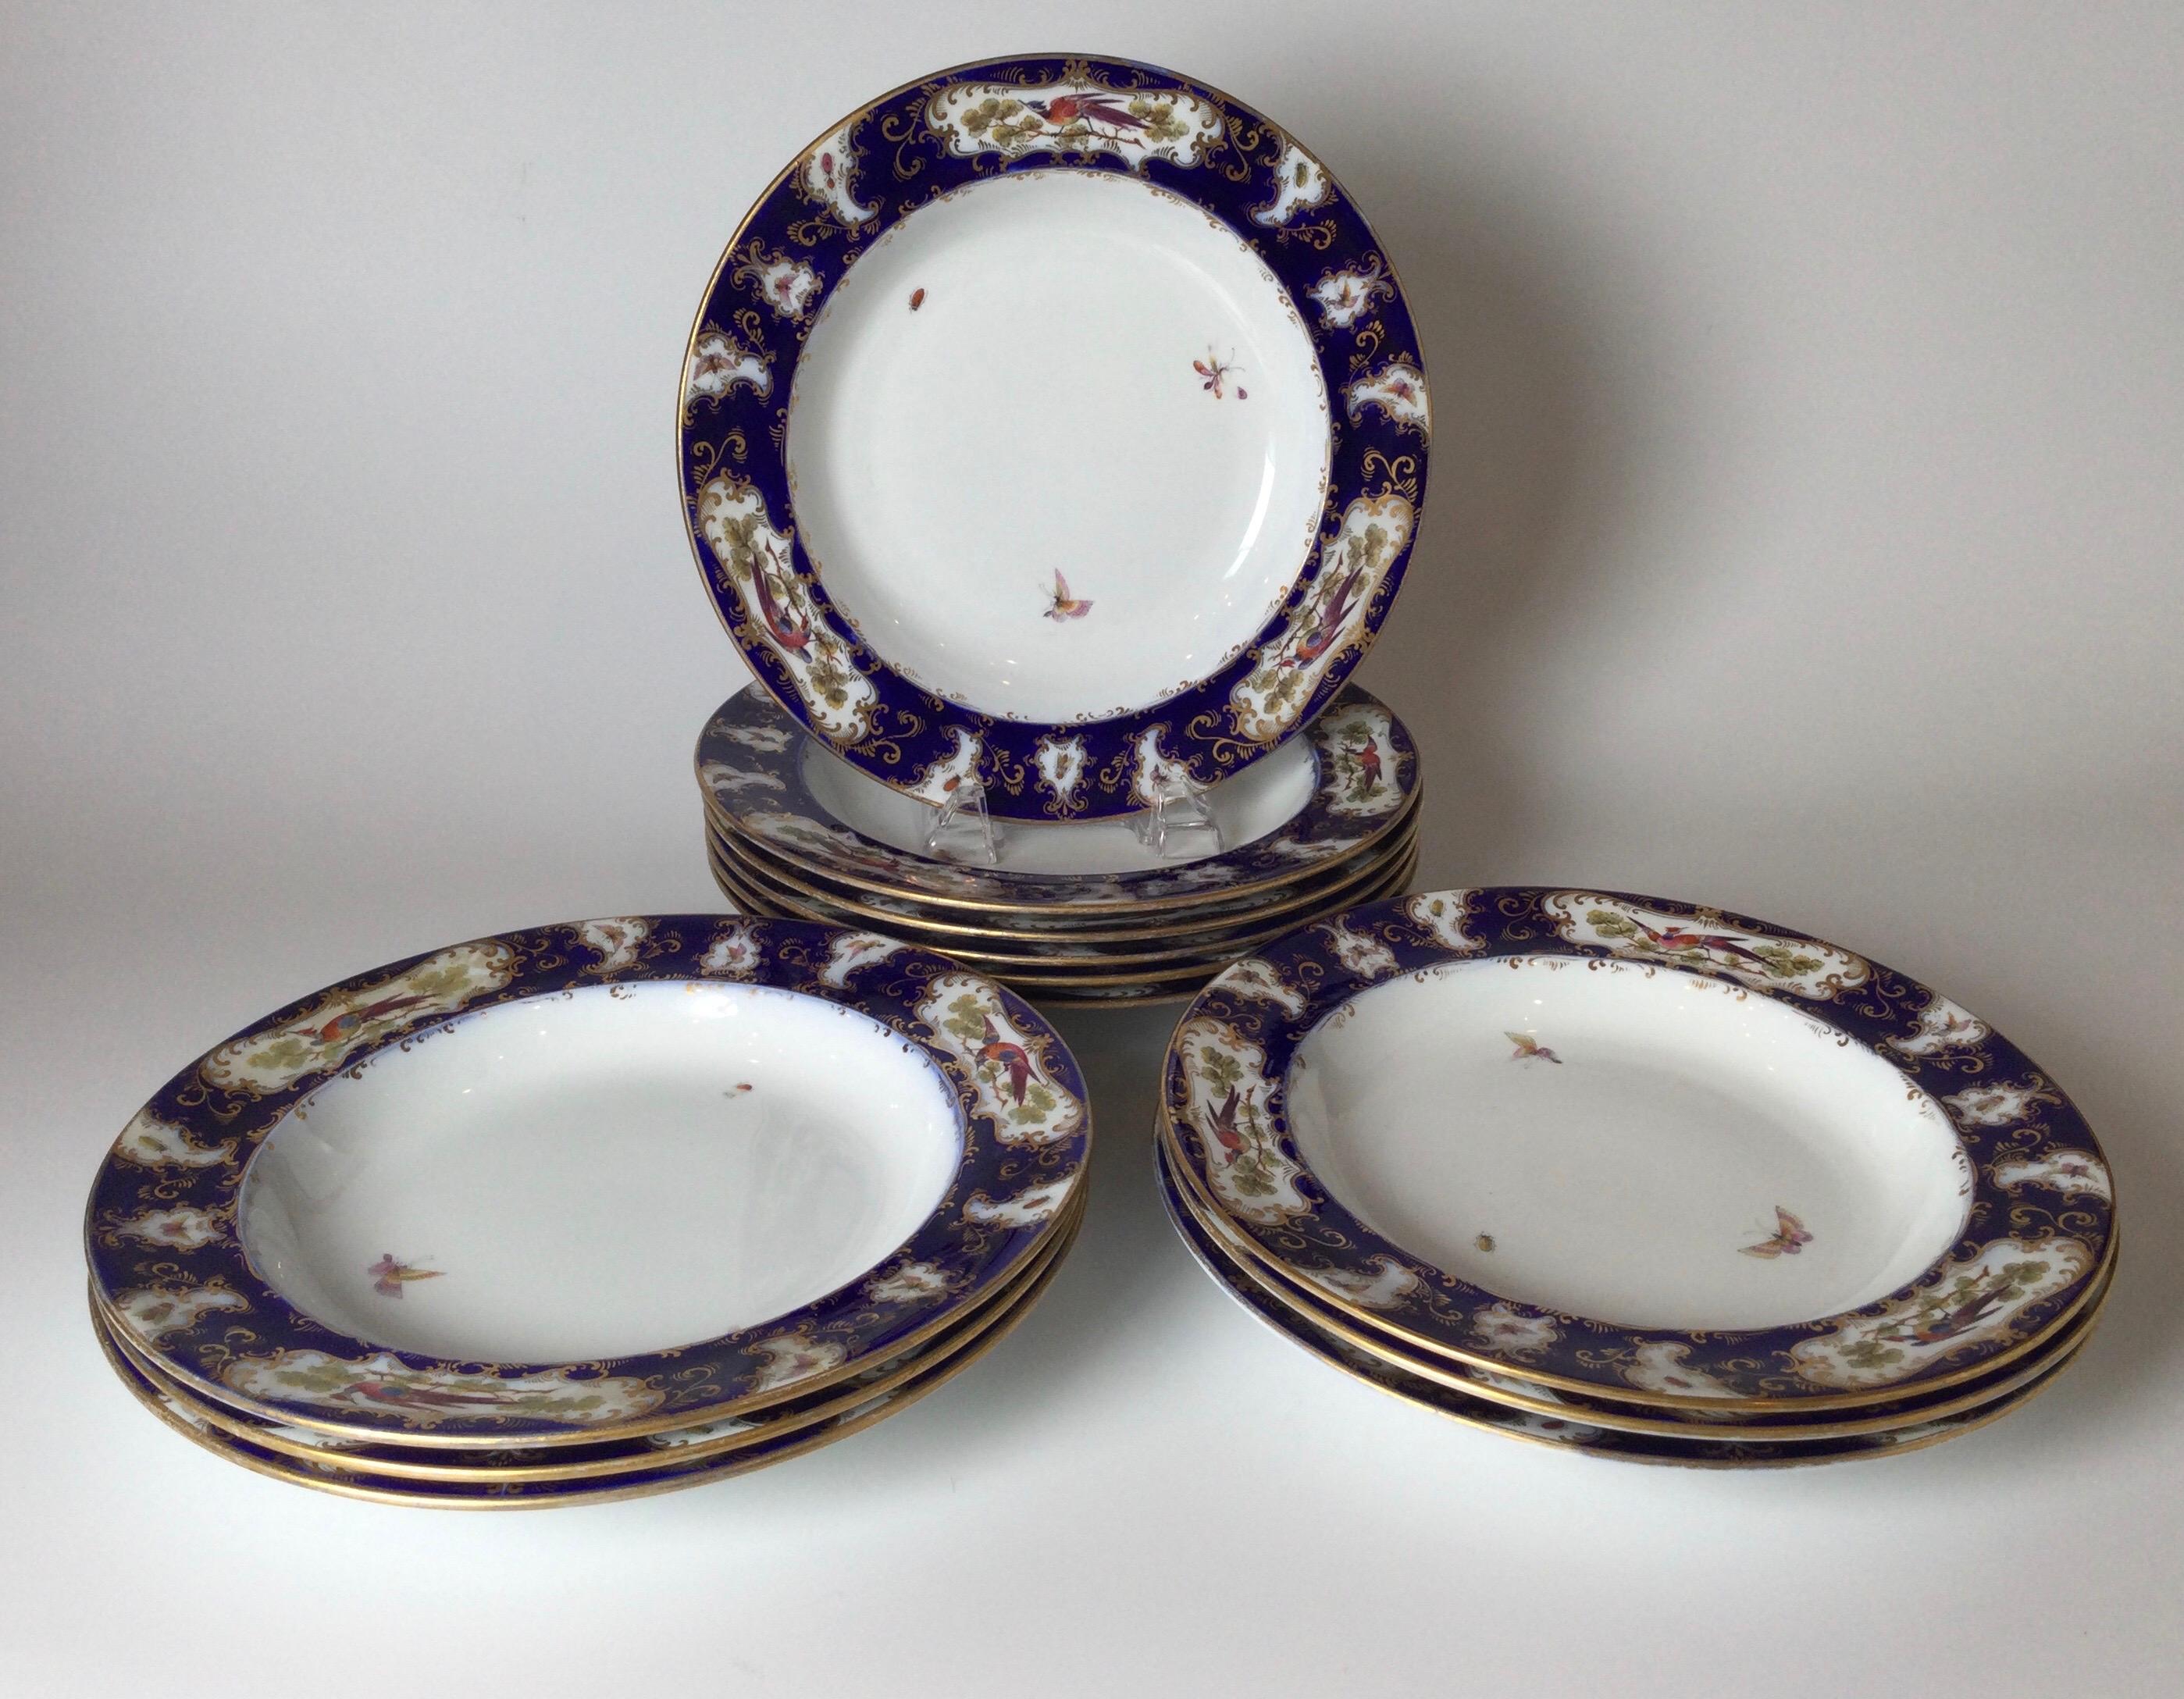 Set of 12 Worcester porcelain Chelsea bird shallow bowls. Great for soups or stews. Marked Worcester England. Phillips of London. Hand painted each having different bugs, insects, butterflies. Cobalt blue, white and gold. 10